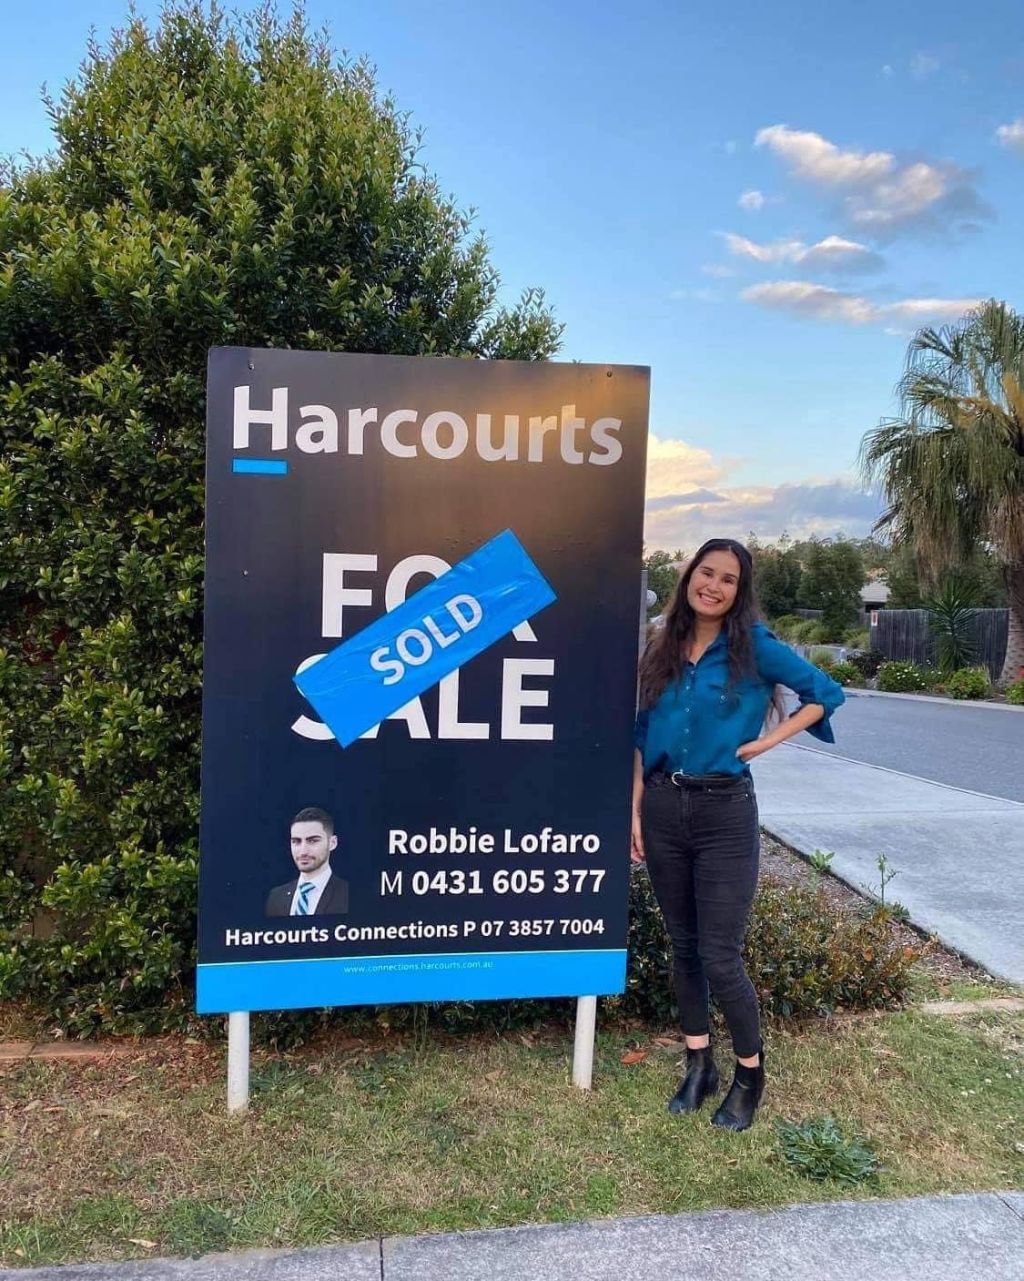 Selene Bruynzeels is paying just $237 a week for her home loan, less than what it would cost her to rent a property in that suburb. Photo: Supplied